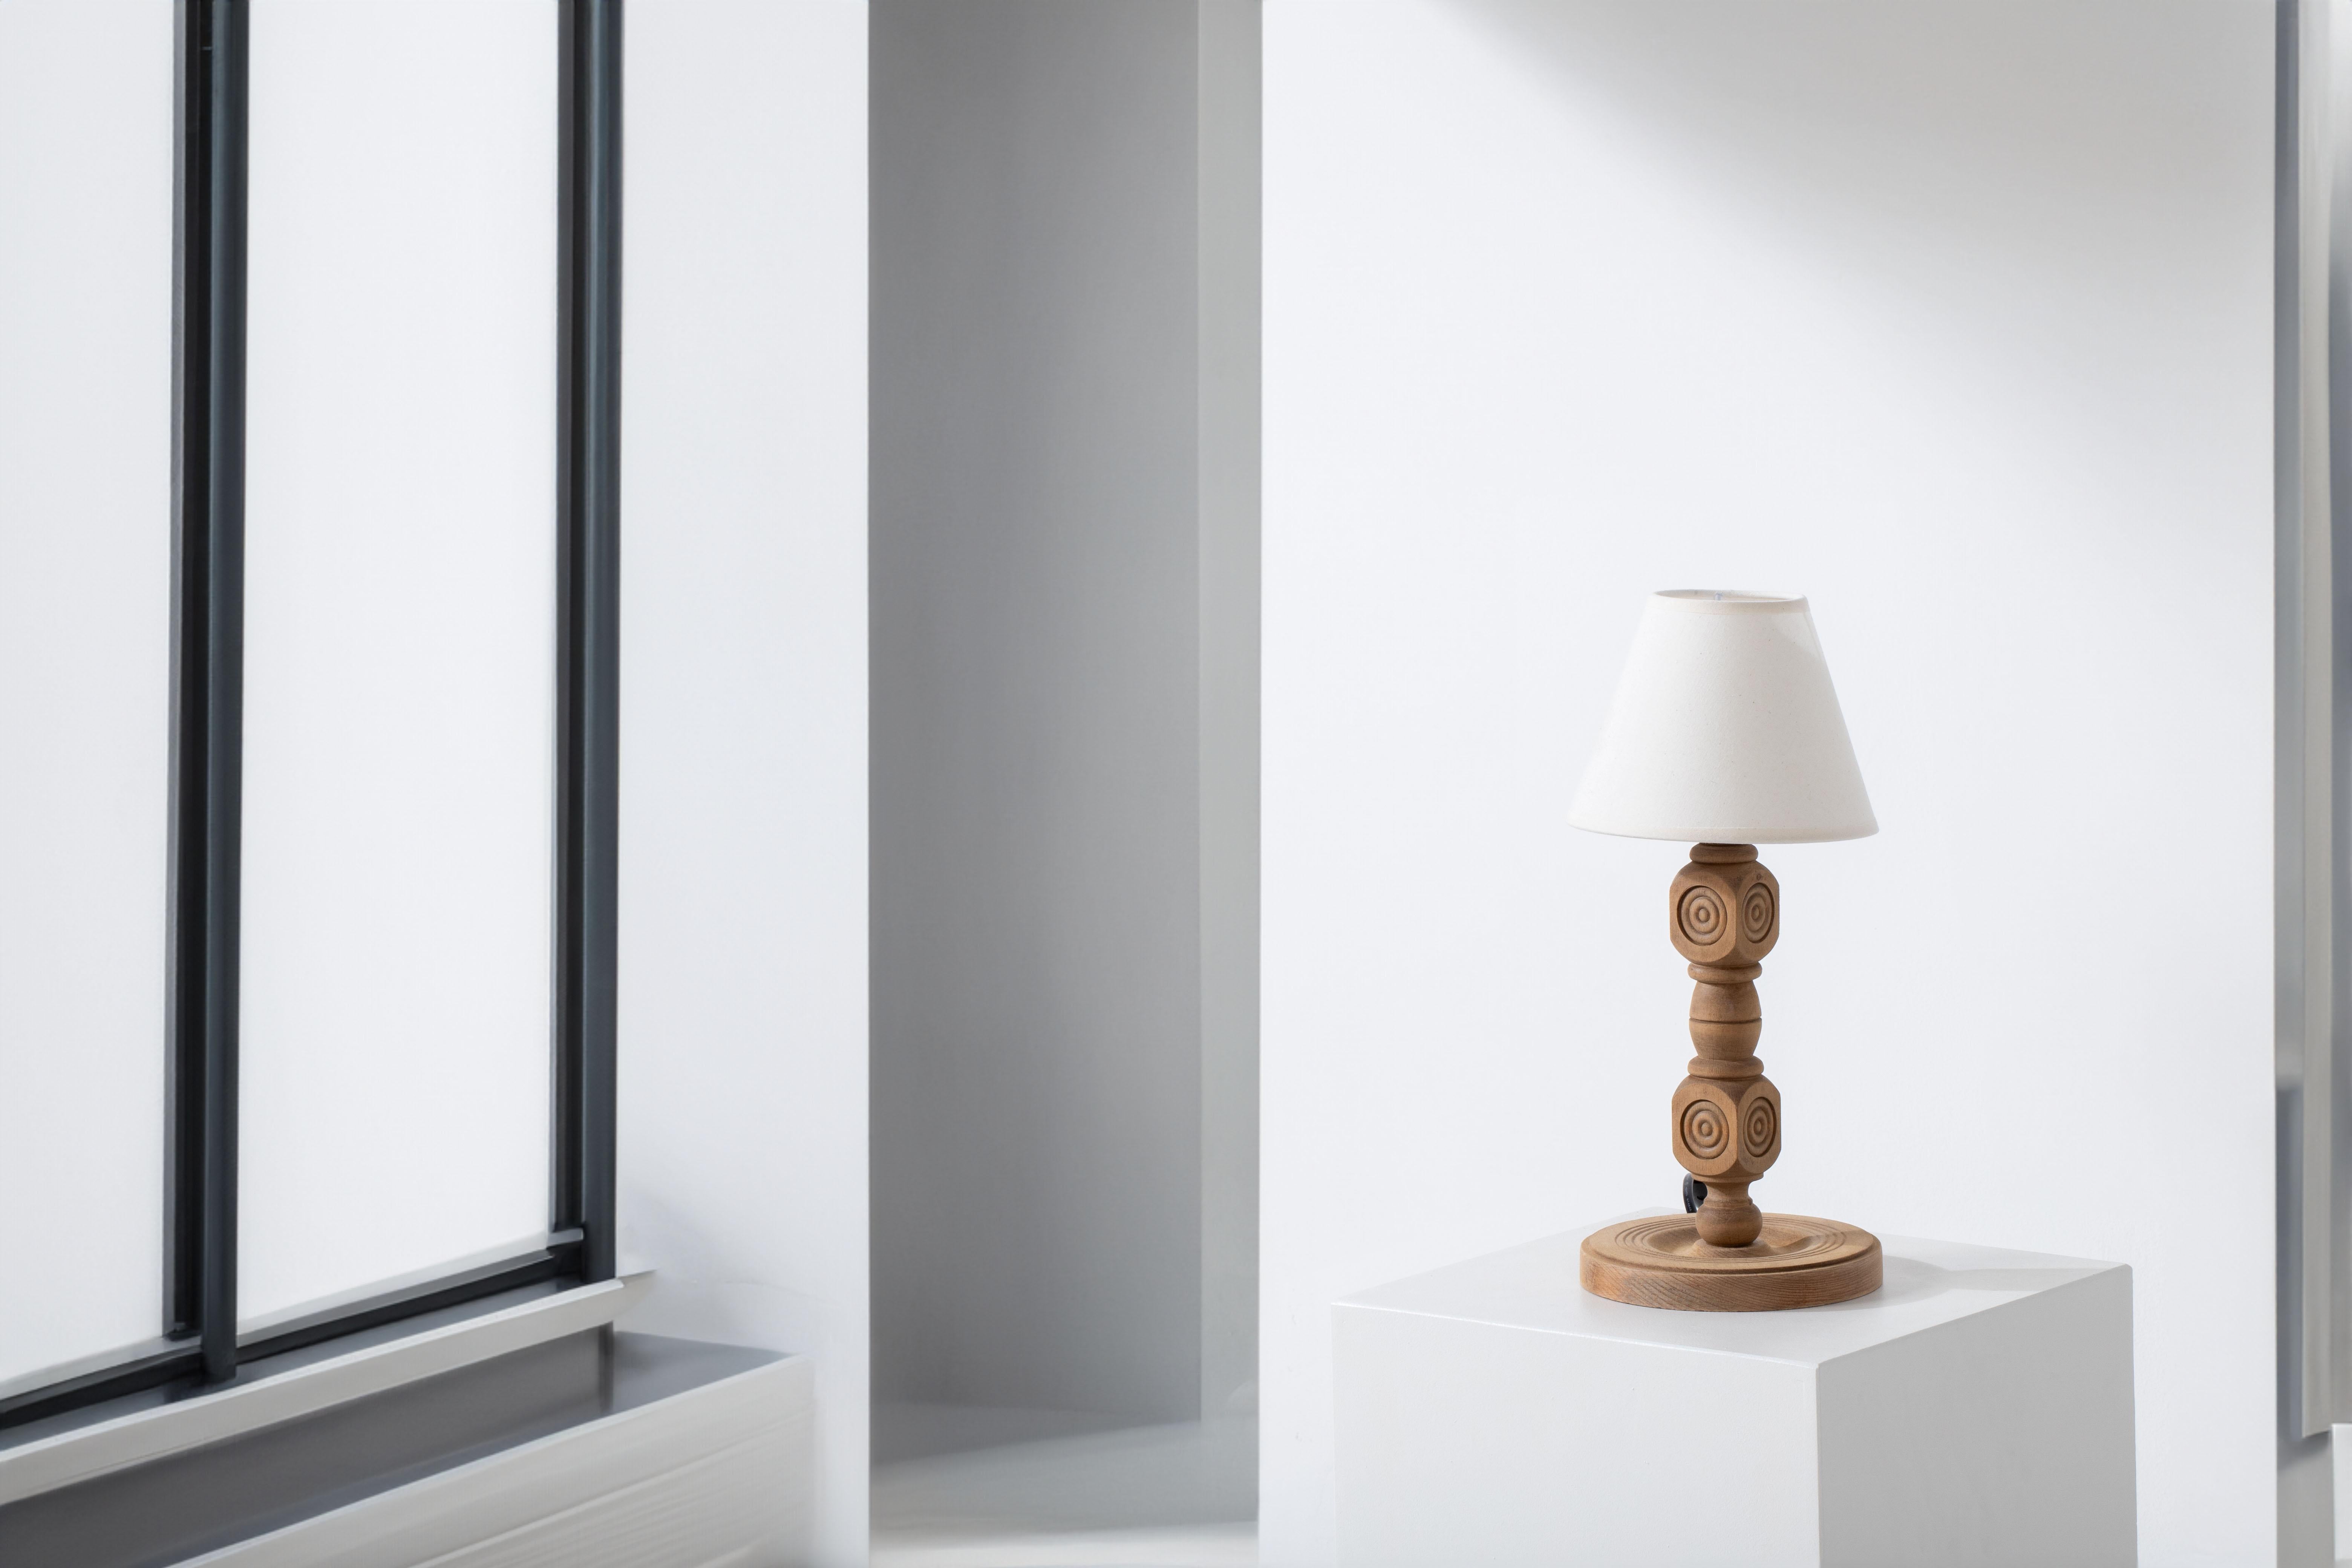 Elegant Handcarved Table Lamp: A Dudouyt-Inspired Masterpiece from the 1940s

Step into the refined elegance of the 1940s with this exquisite hand-carved table lamp, reminiscent of the iconic style of Charles Dudouyt. This lamp is a testament to the